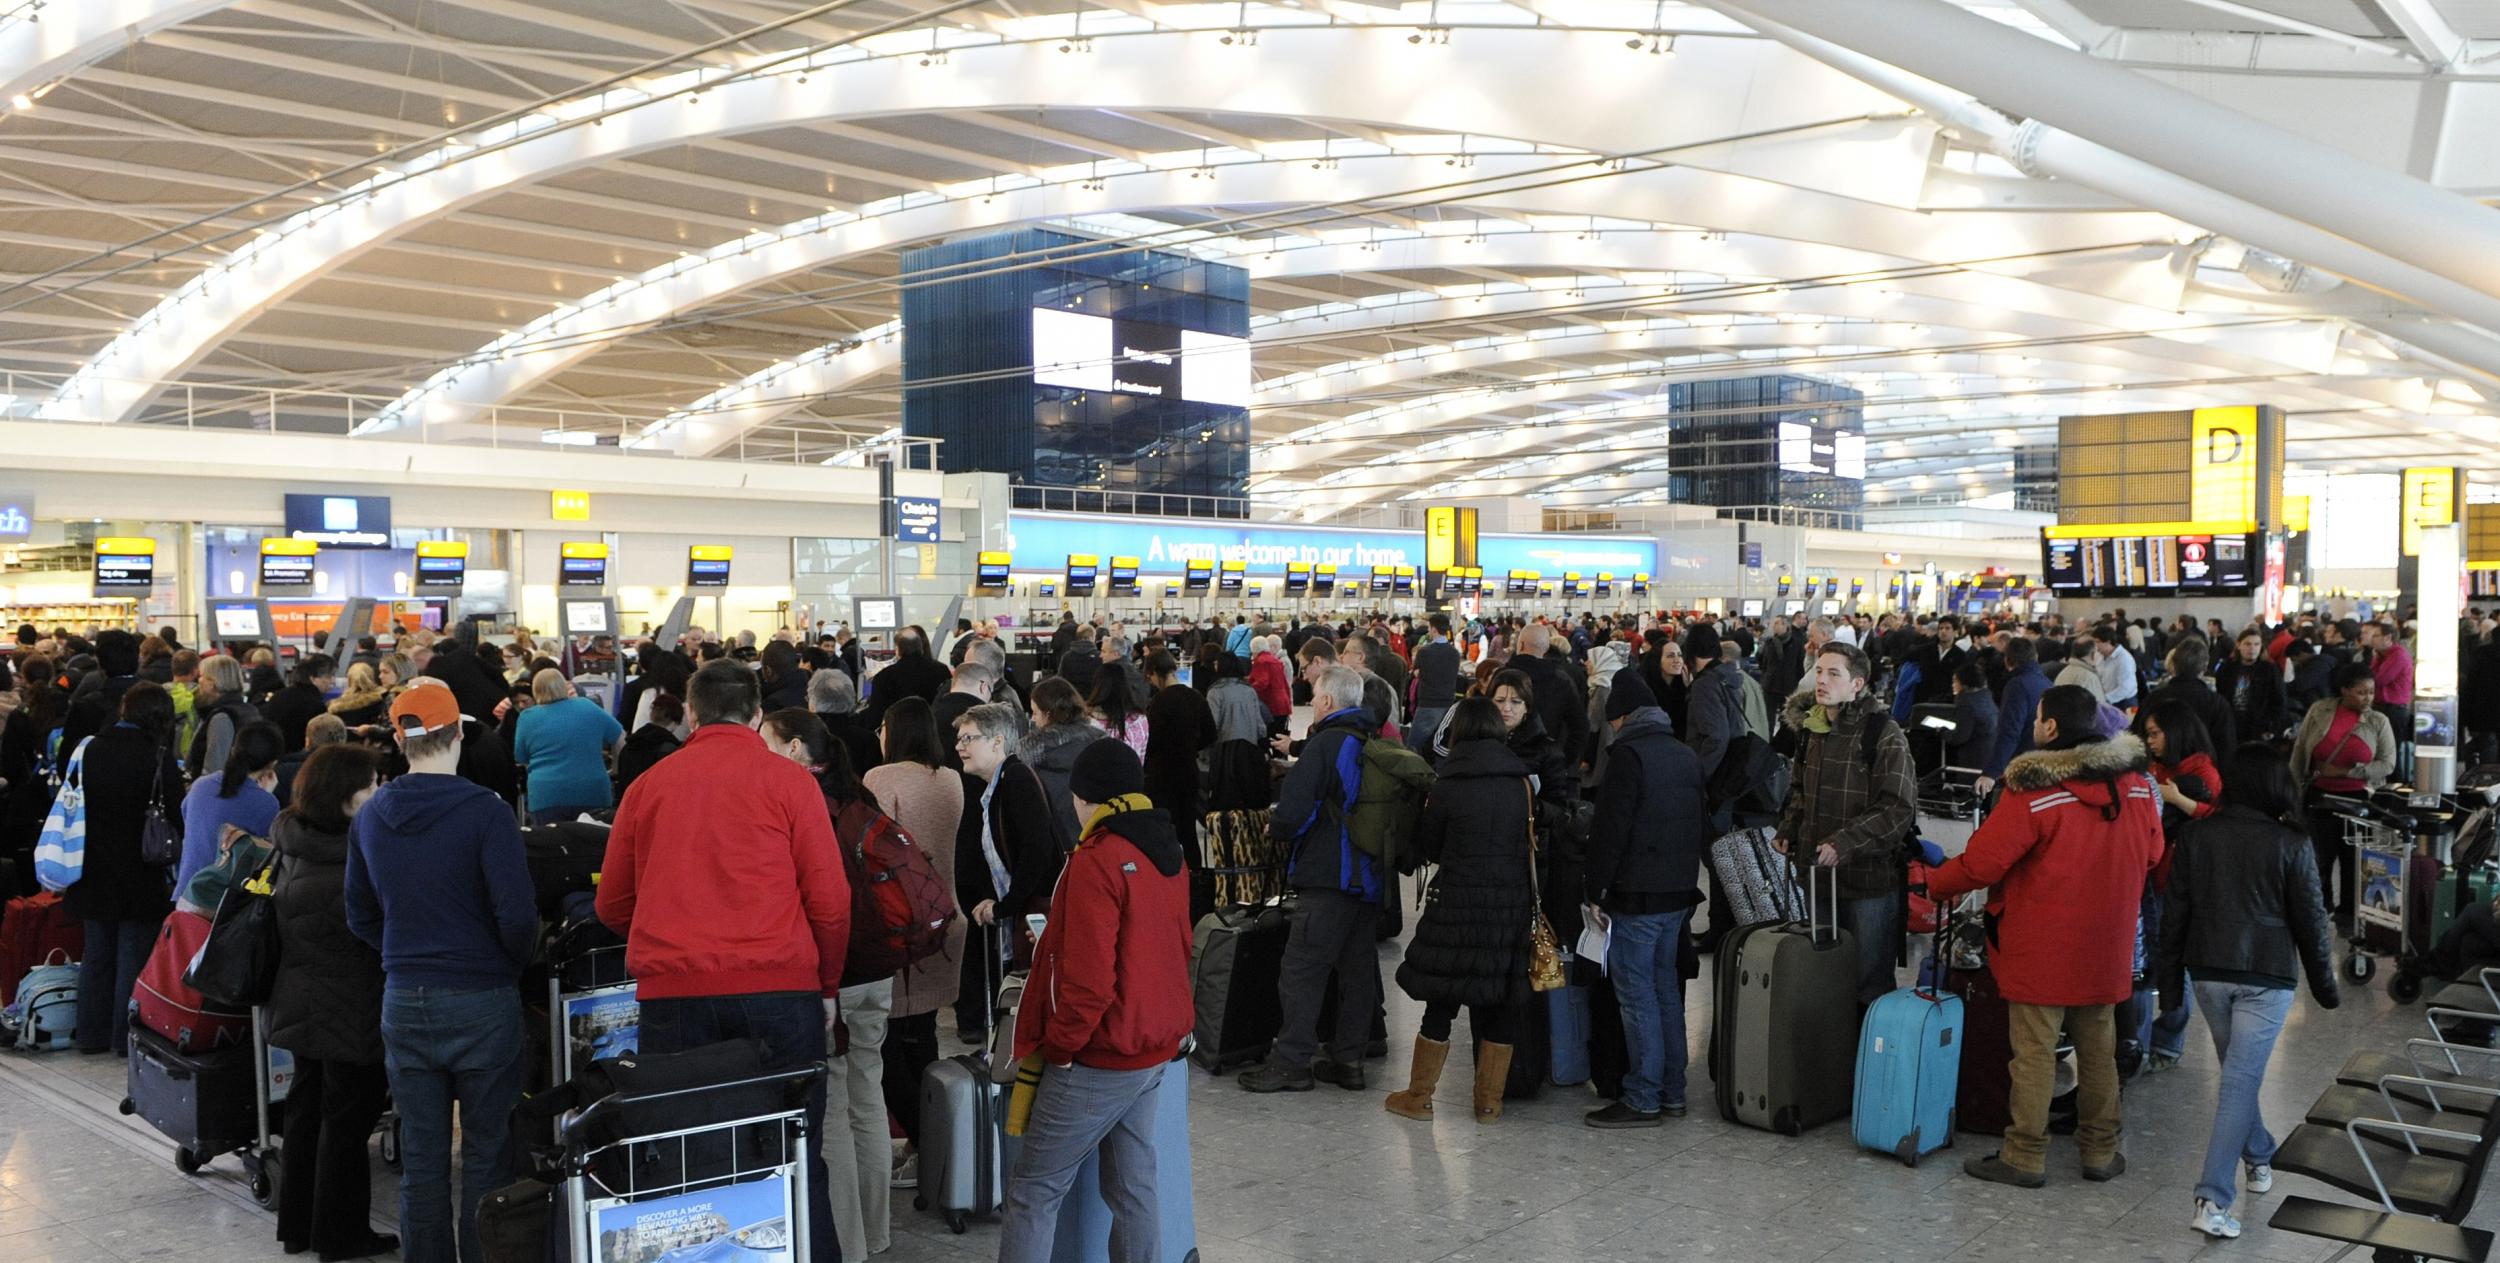 Booking the VIP experience means no more queues like these at Heathrow